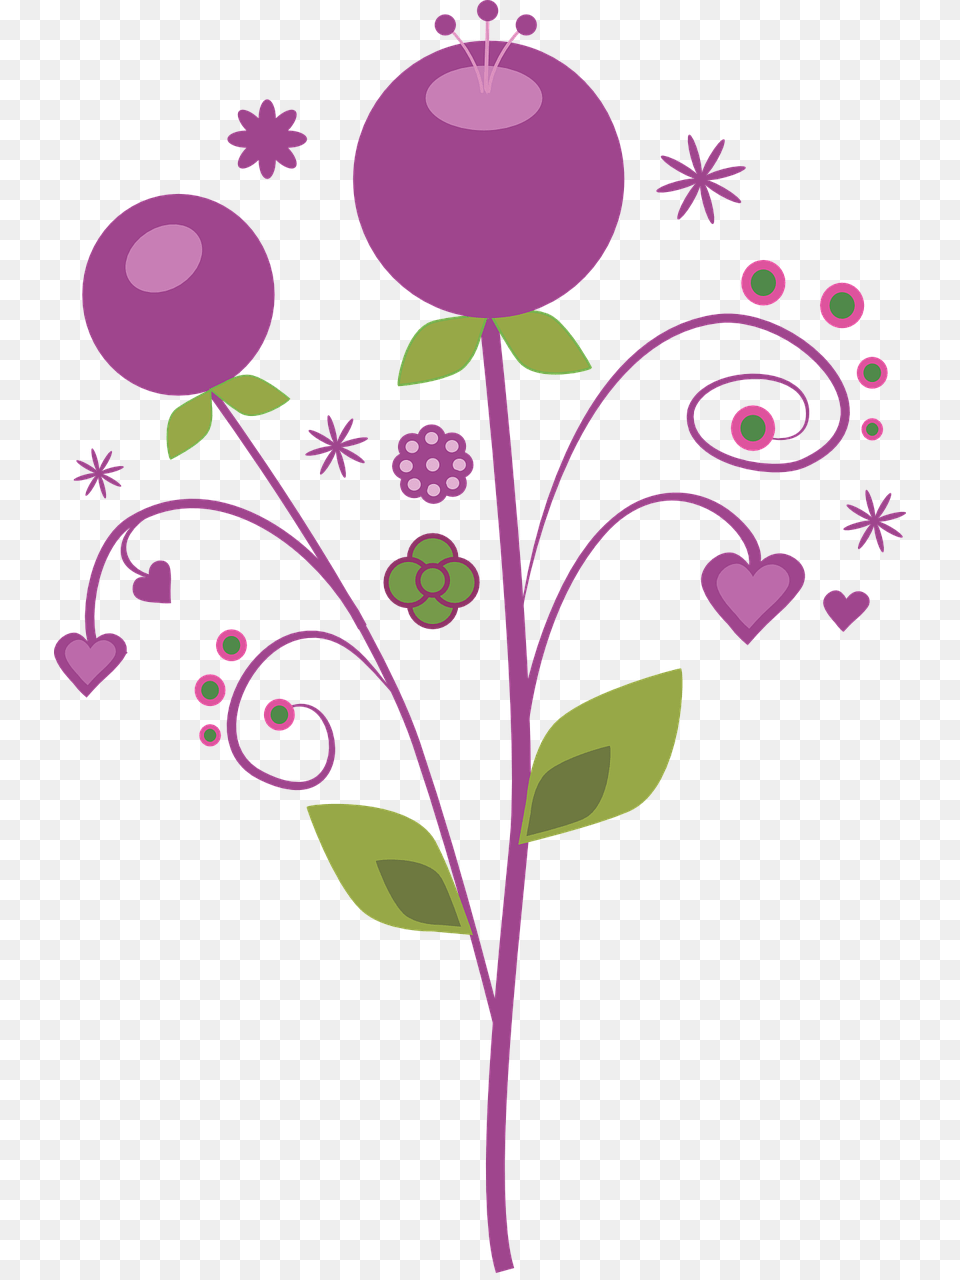 Purple Vector Flowers Fantasy Berry Swirls Photo Vector Flores, Art, Floral Design, Graphics, Pattern Free Png Download